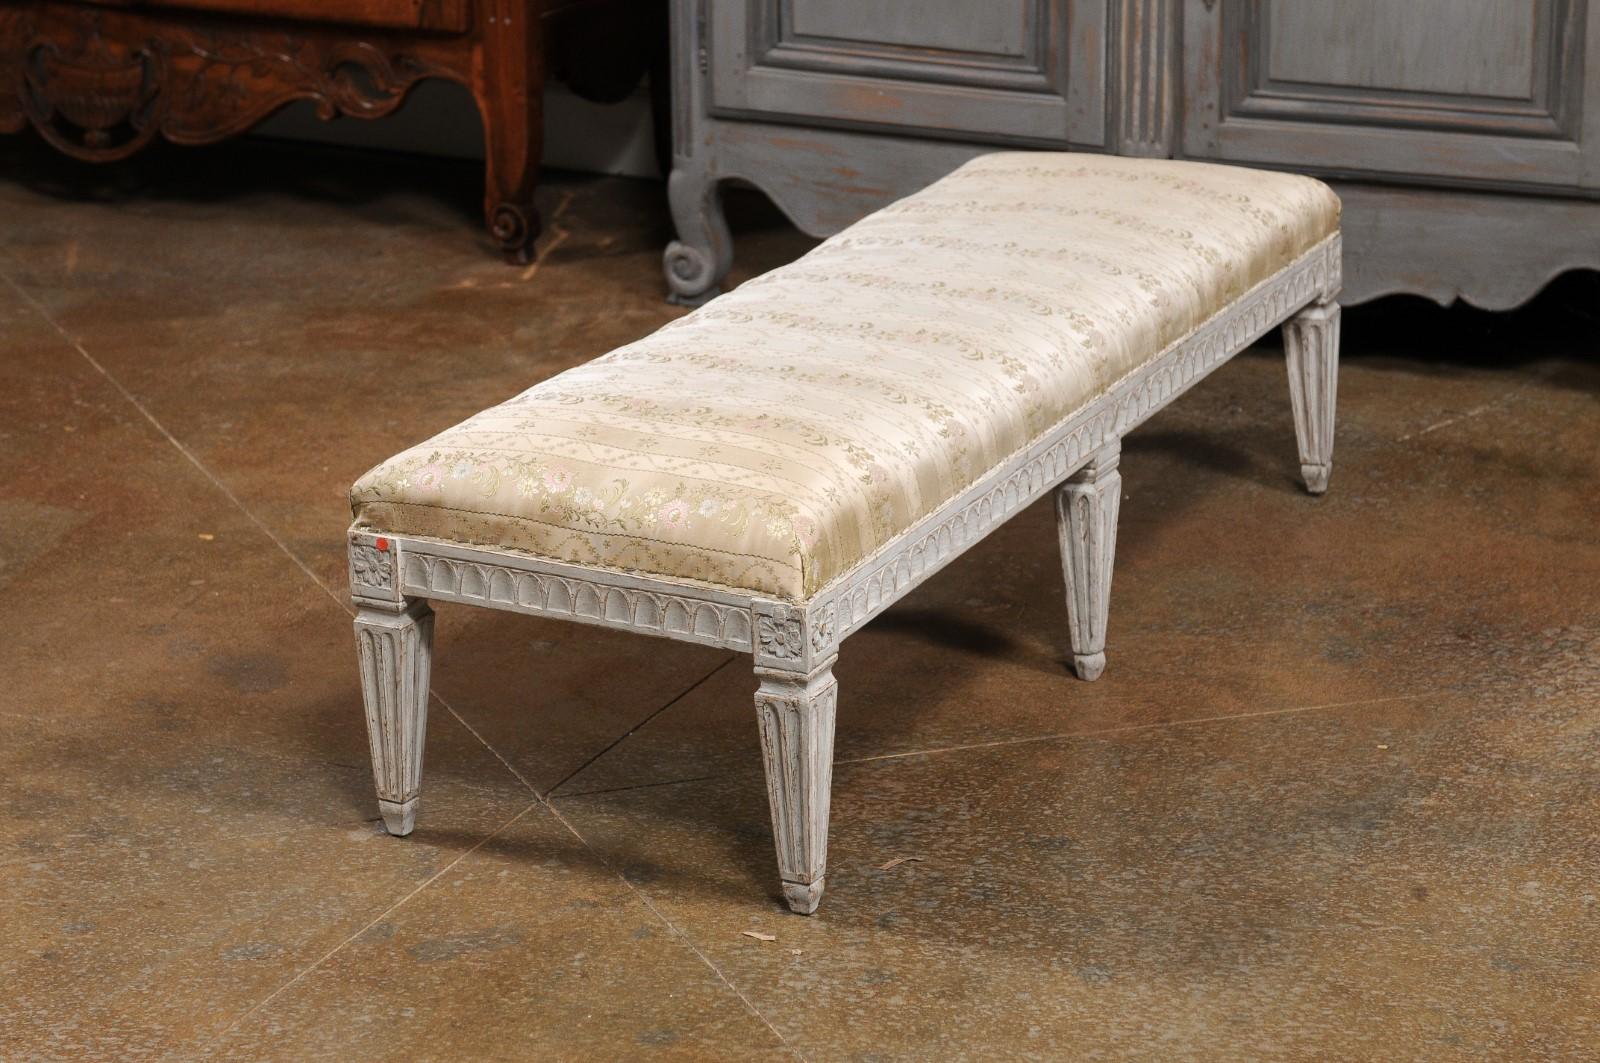 Swedish 19th century painted bench Circa 1880
Place of Origin: Sweden
Period: 19th century
Dimensions: 53